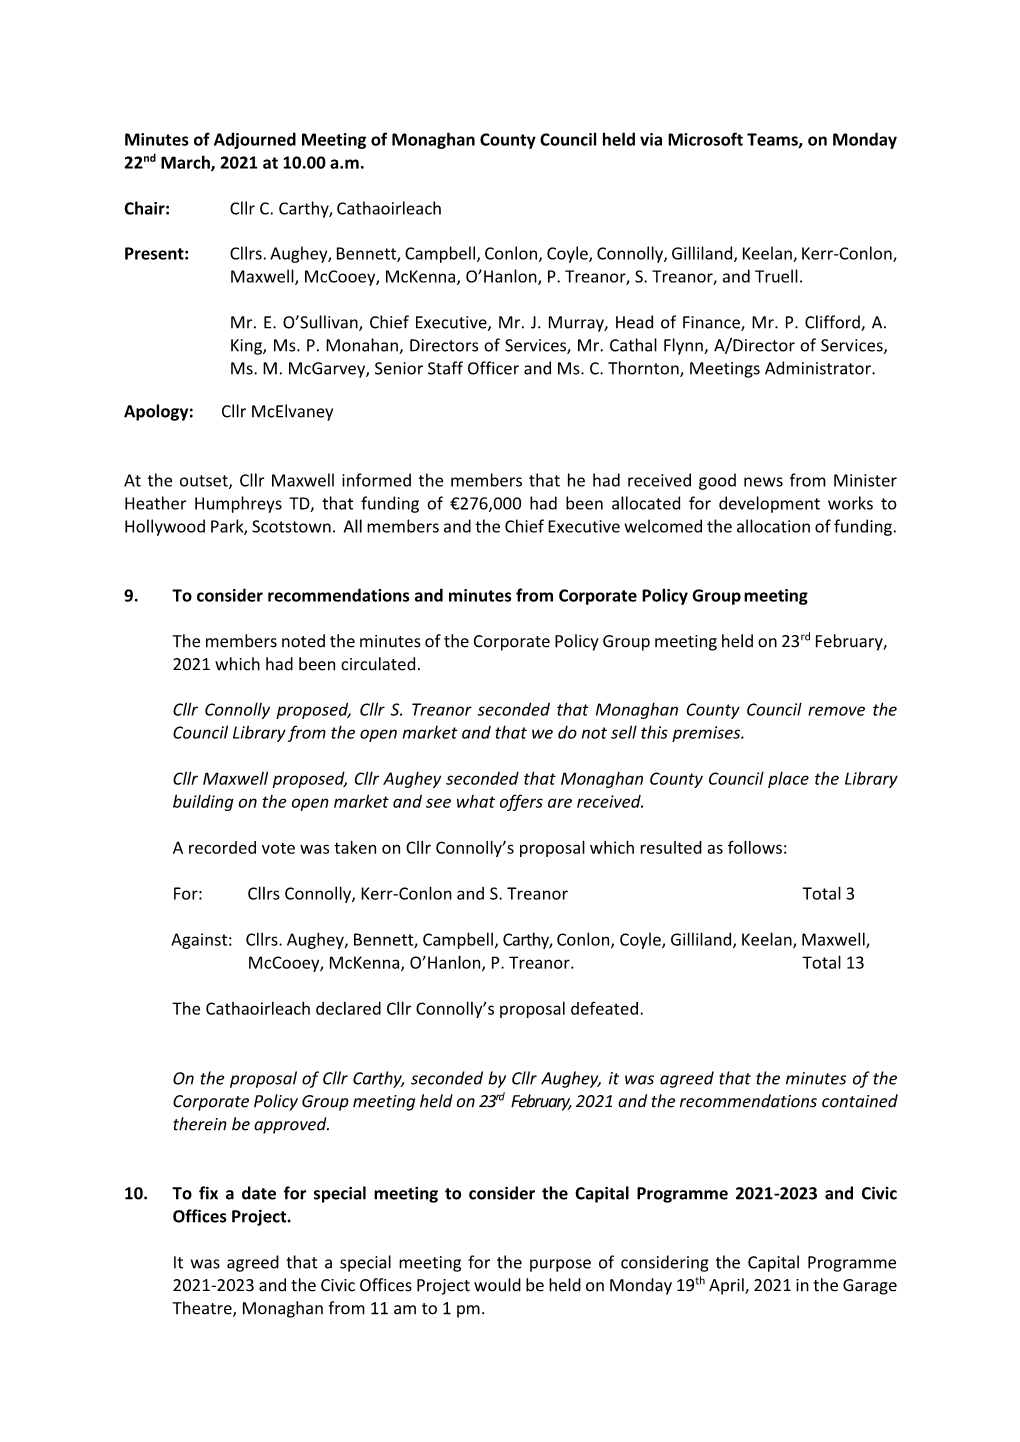 Council Meeting Minutes 22Nd March 2021